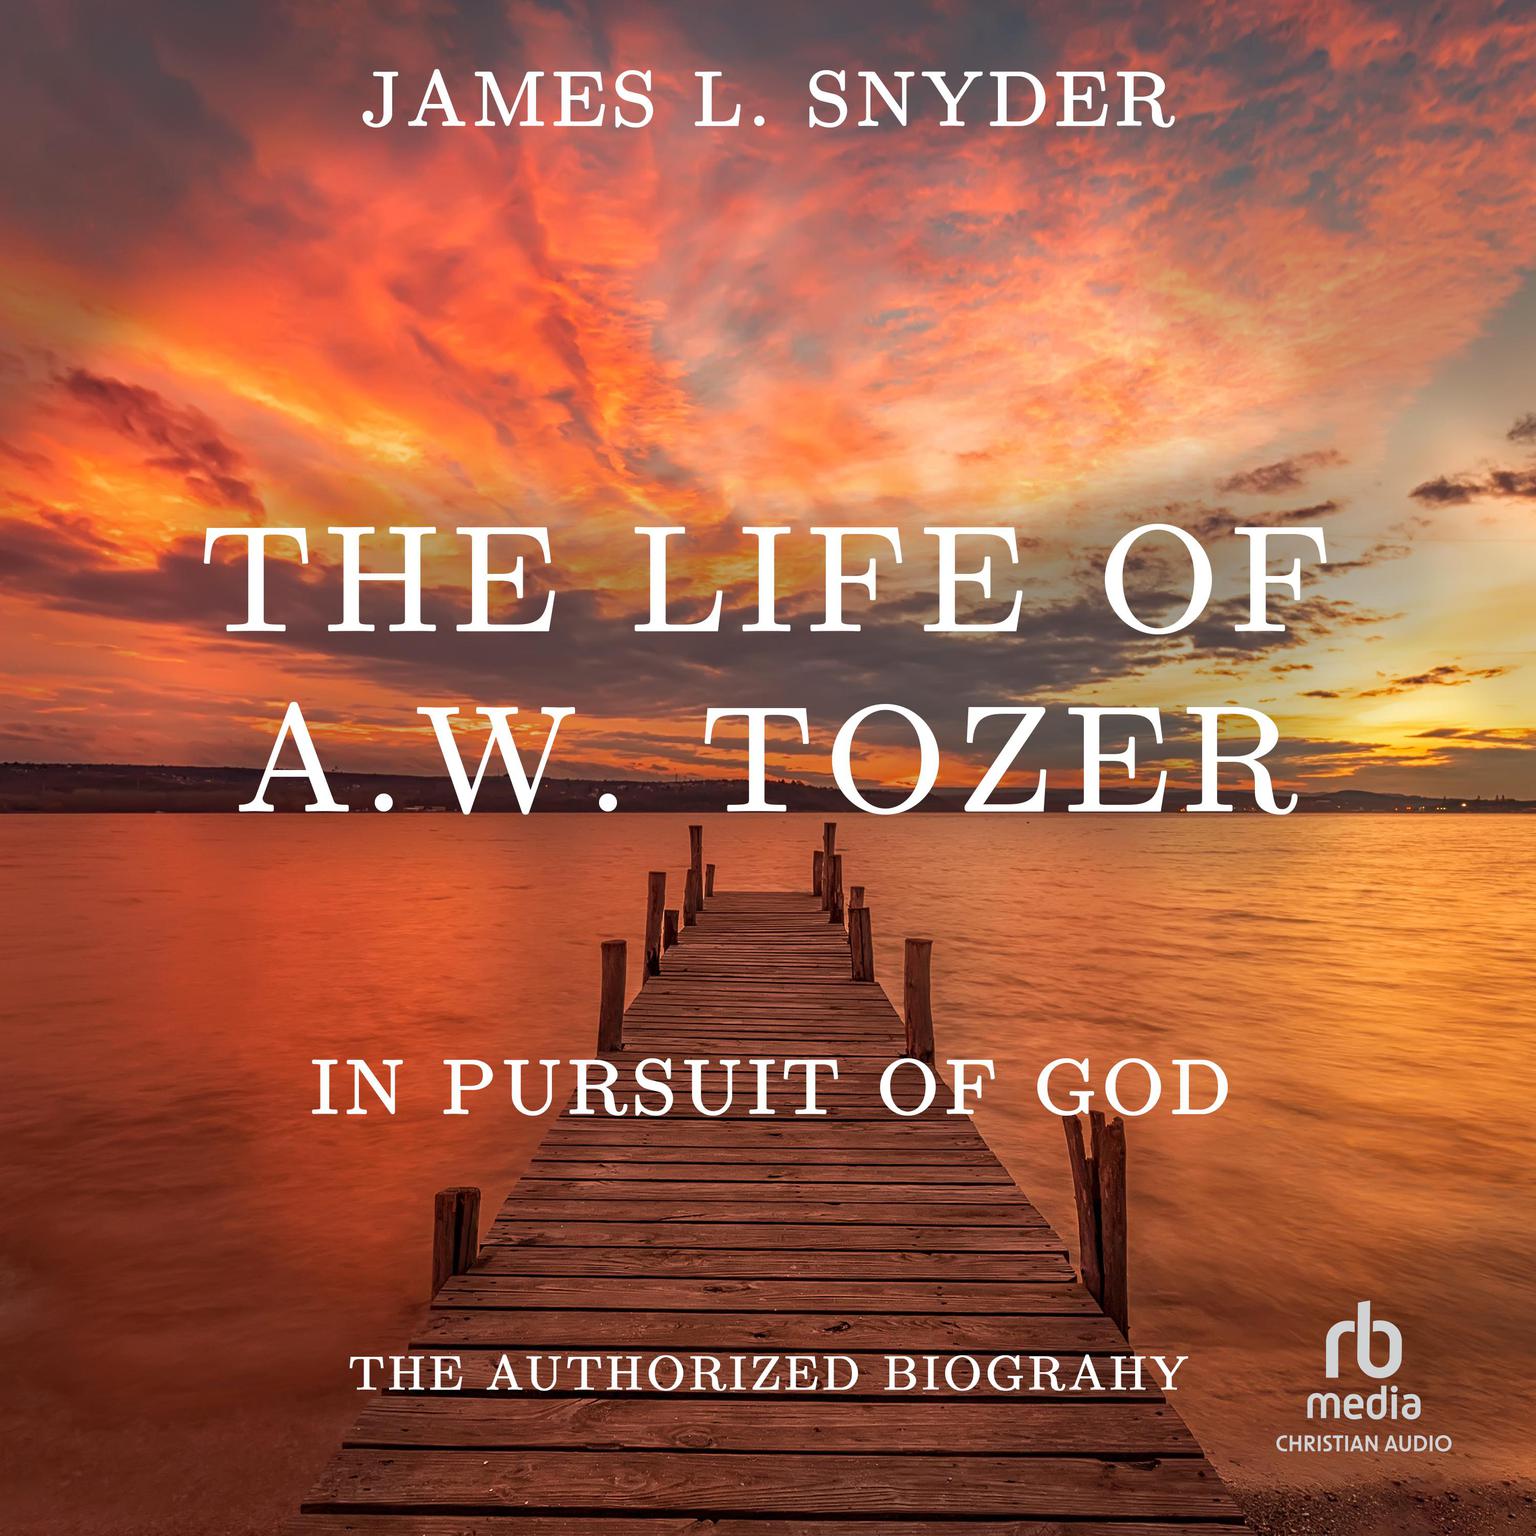 The Life of A.W. Tozer: In Pursuit of God Audiobook, by James L. Snyder